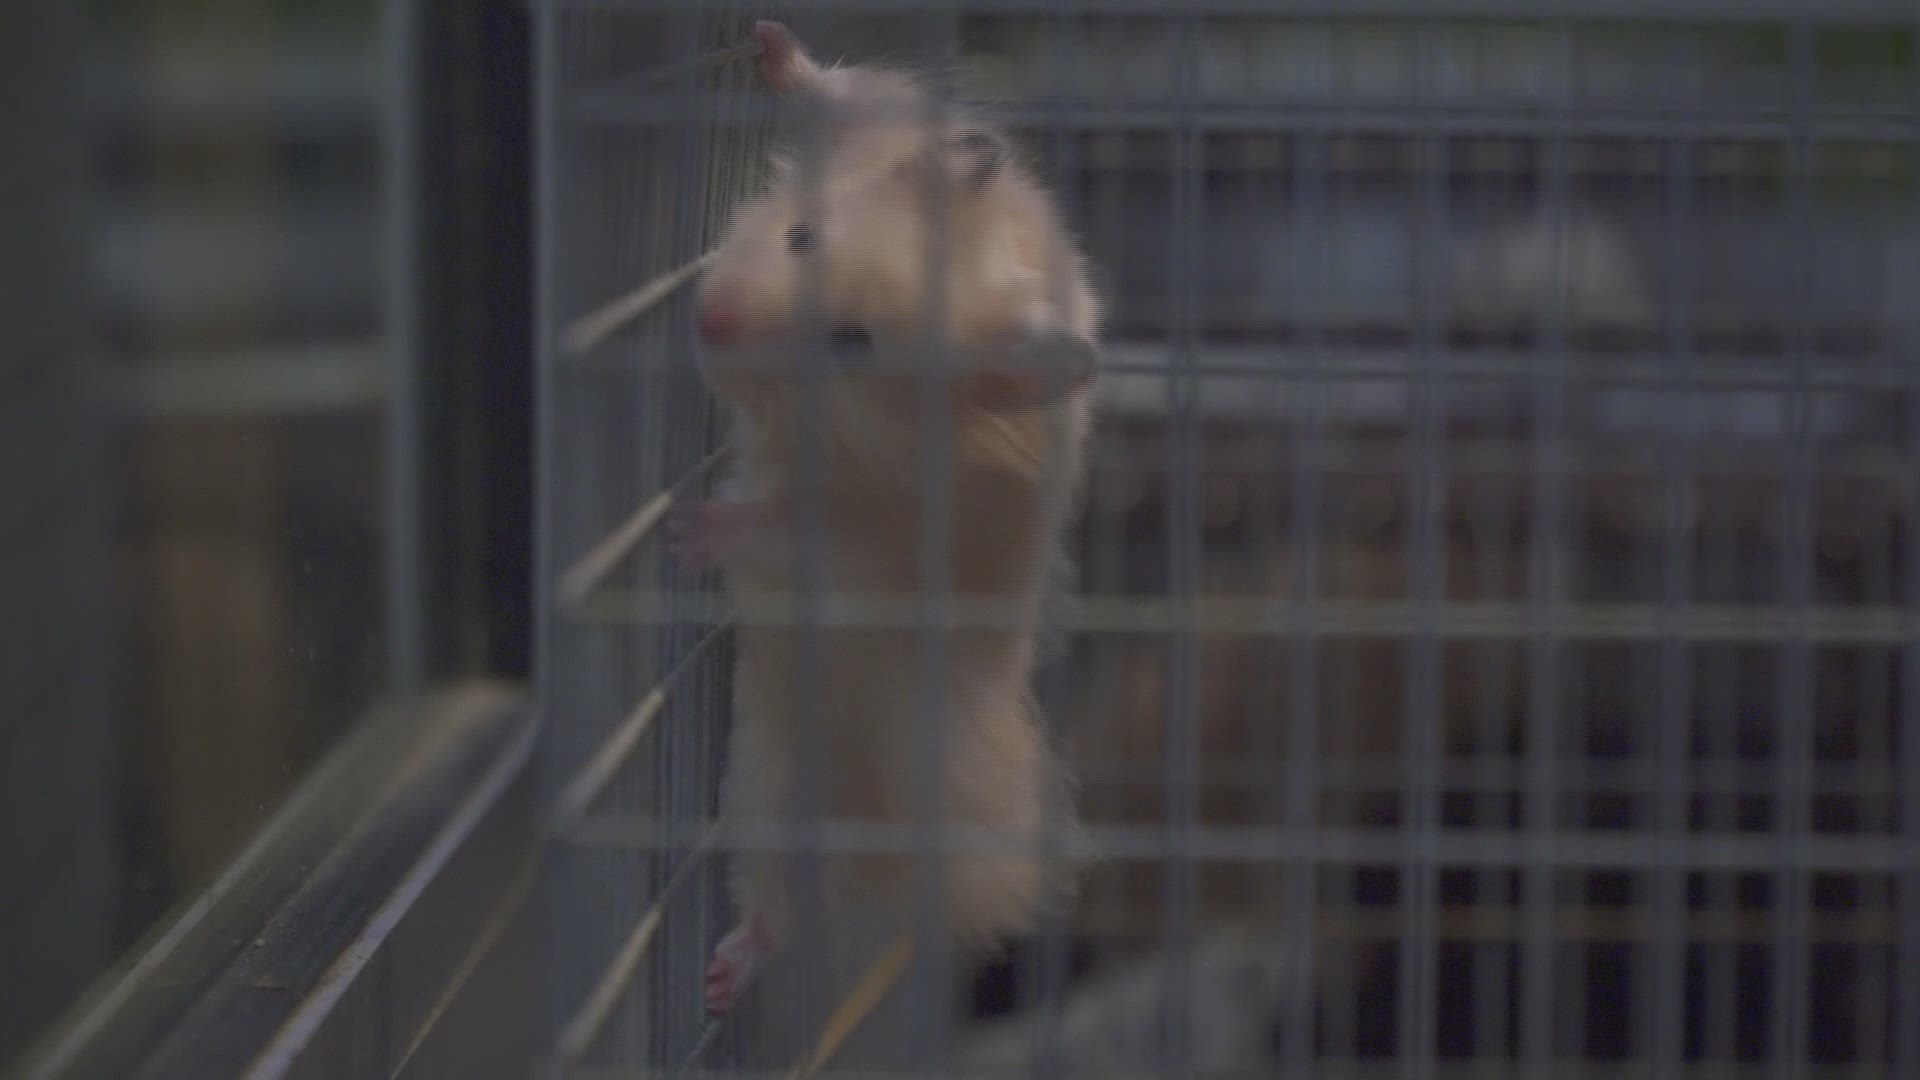 Bradshaw Animal Shelter is looking to rehome more than 50 hamsters that were abandoned near a pet store Tuesday. Two of the hamsters are pregnant.